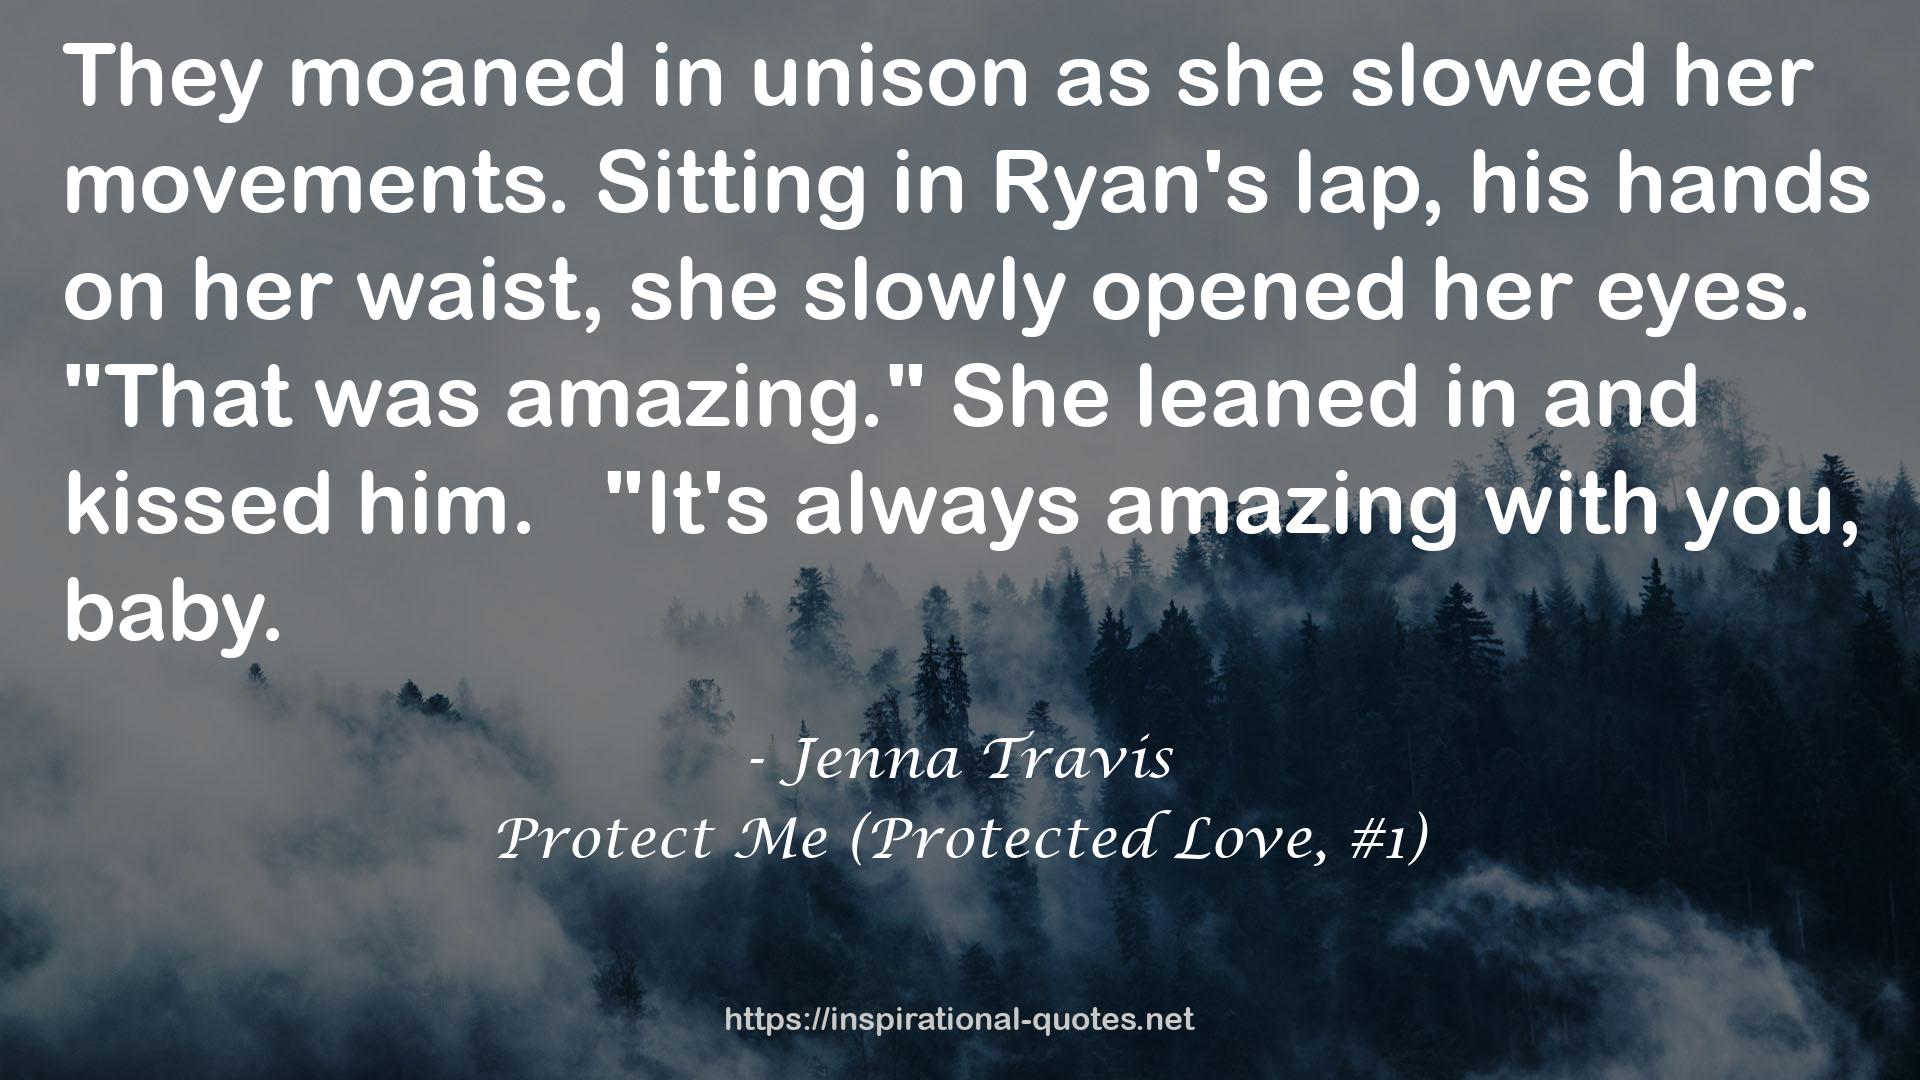 Protect Me (Protected Love, #1) QUOTES